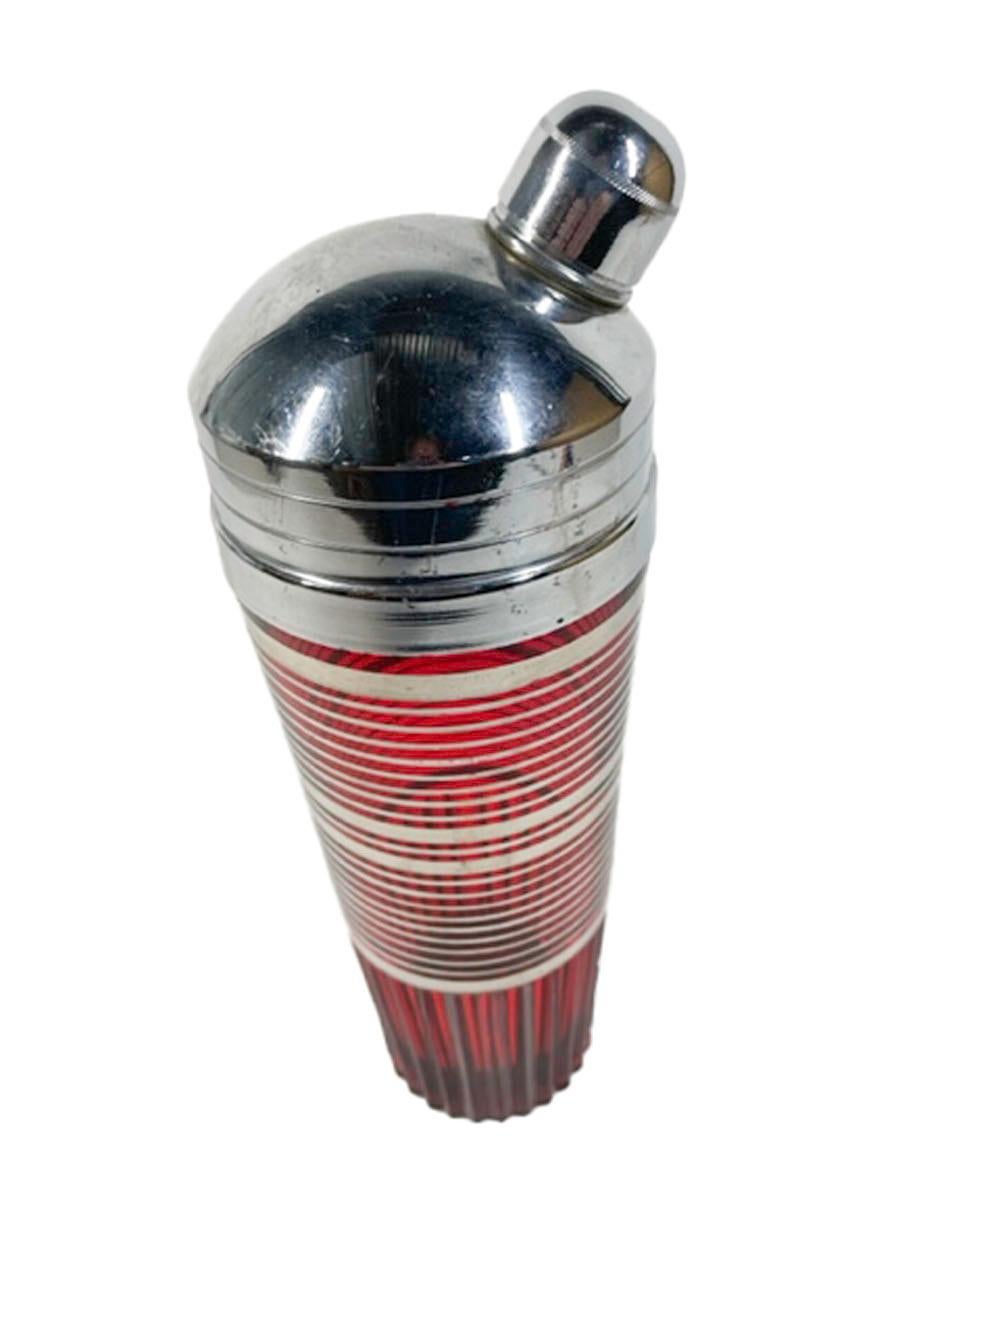 American Art Deco, Paden City Glass Cocktail Shaker in the Glades Pattern, Ruby W/Silver